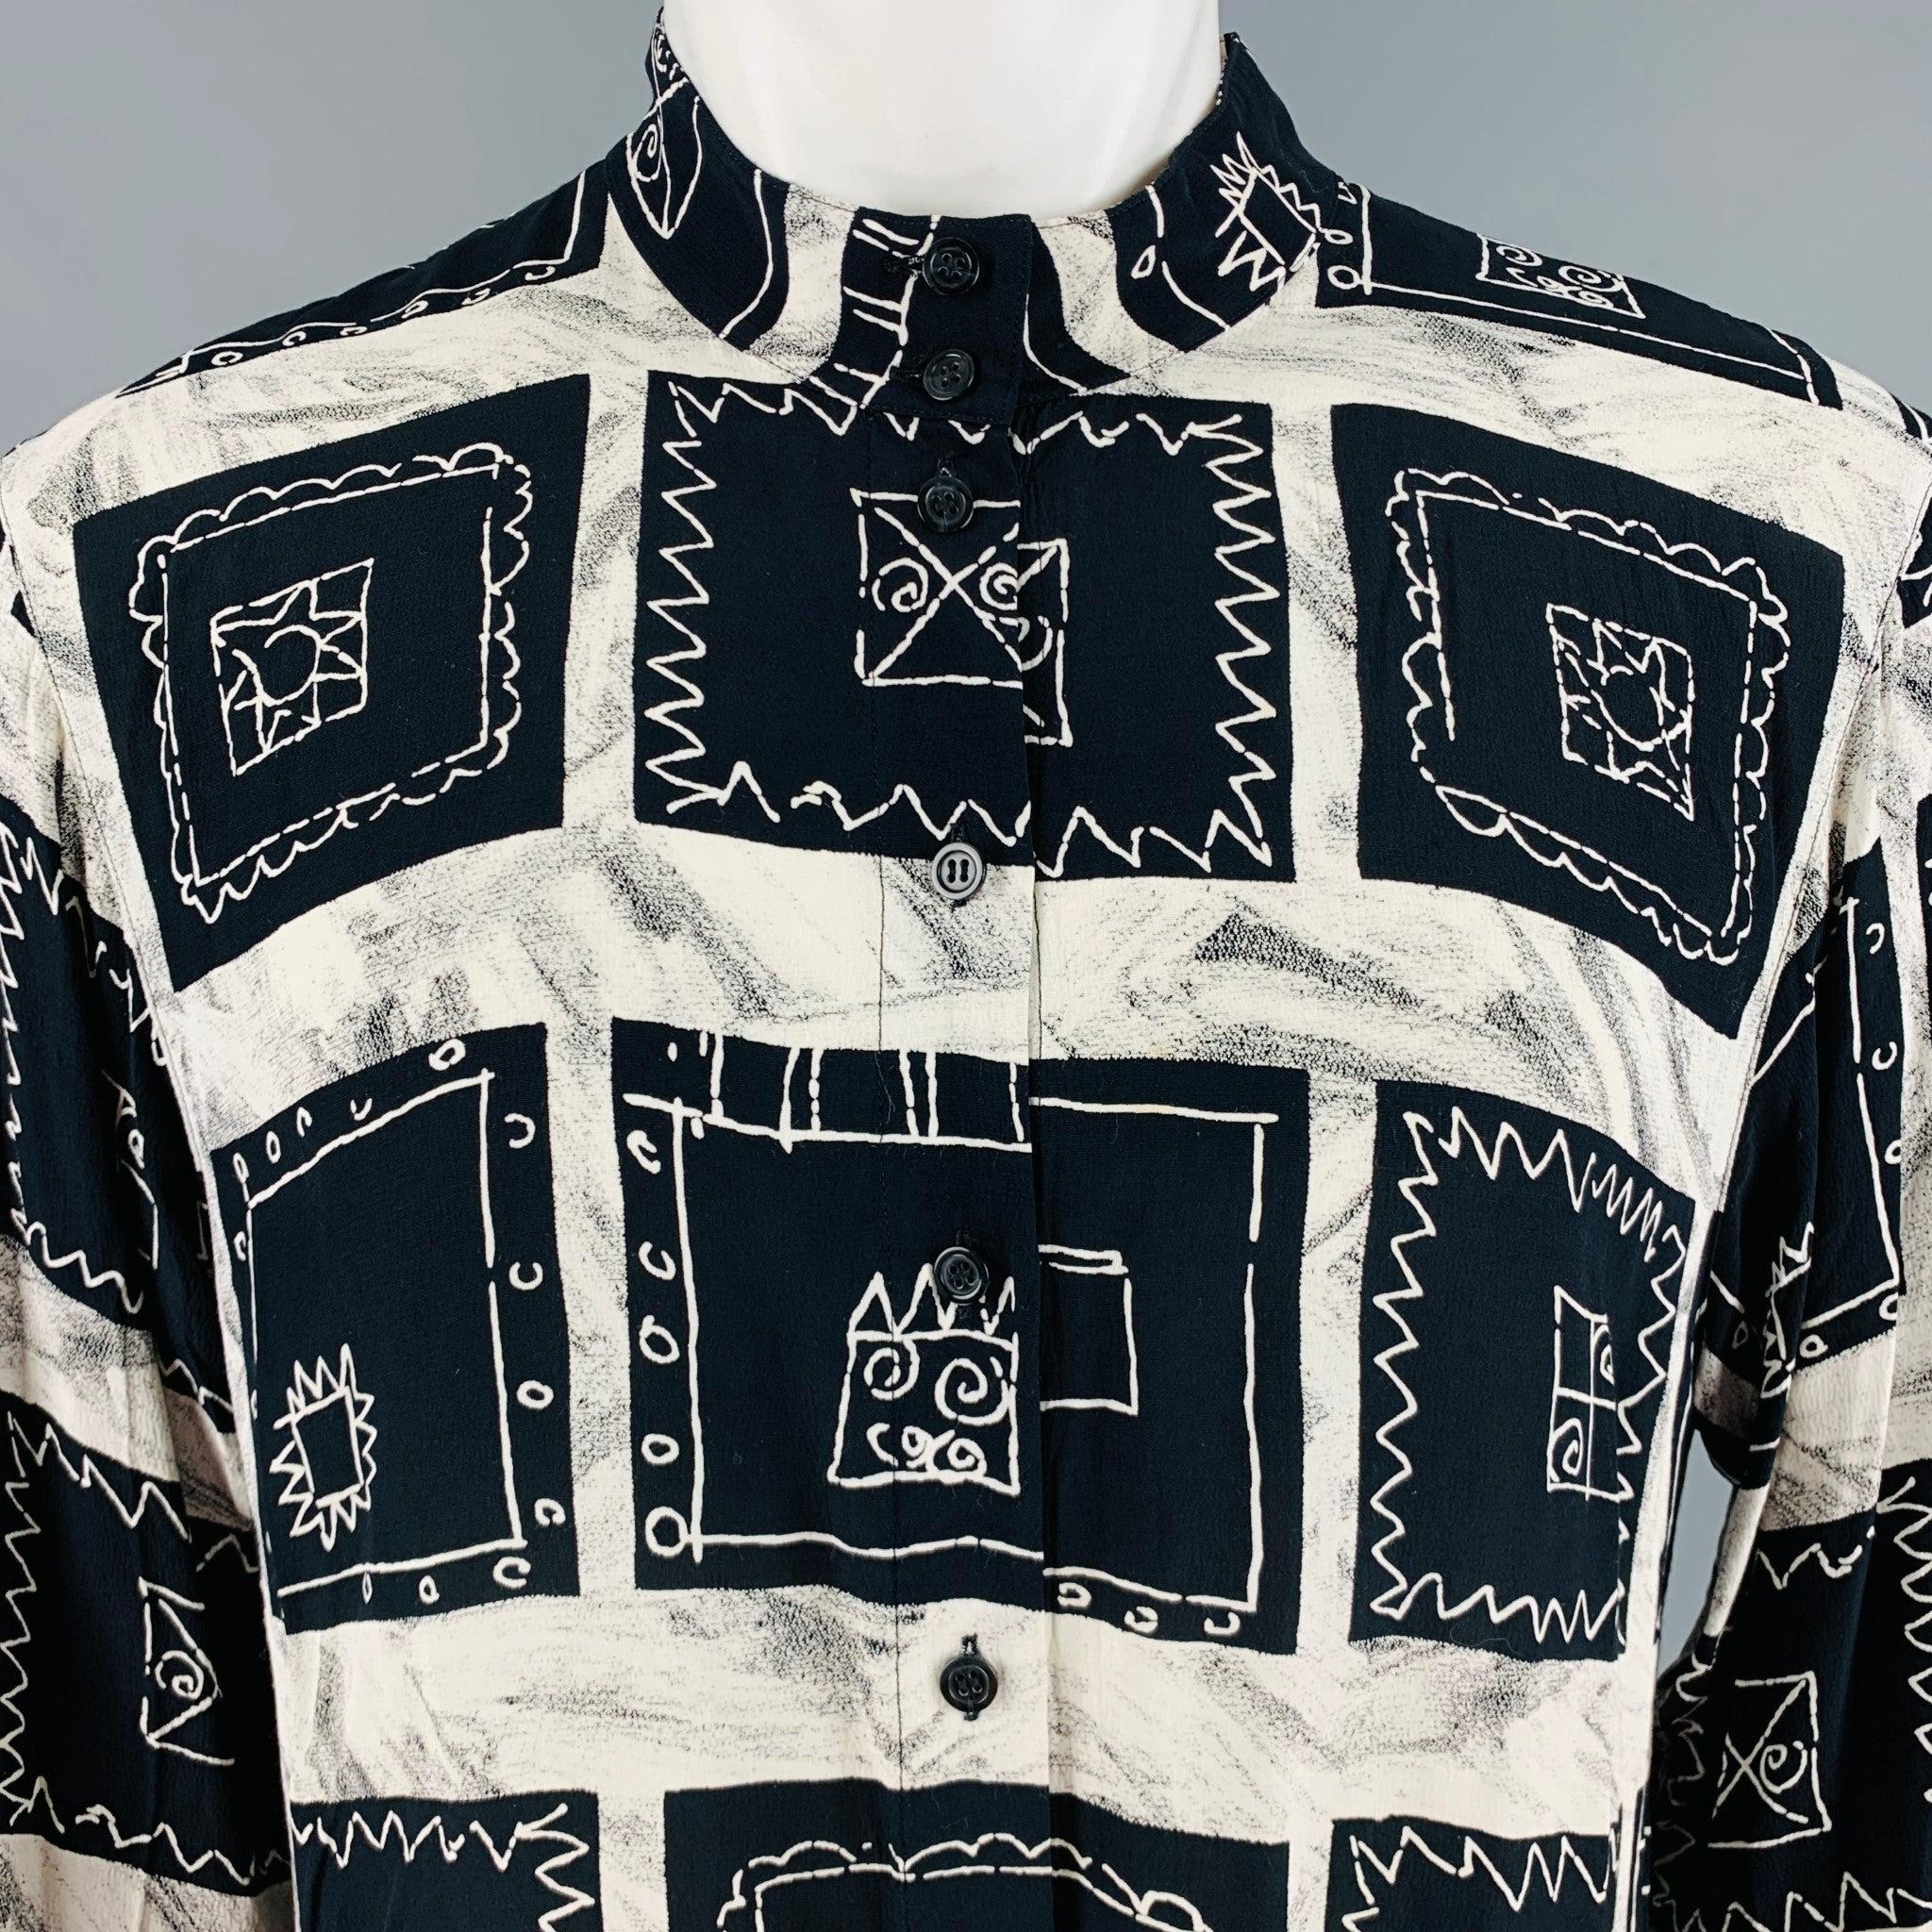 PACO RABANNE long sleeve shirt
in a
black and cream rayon fabric featuring an abstract squares pattern, collarless style, and button closure. Excellent Pre-Owned Condition. 

Marked:   9R 

Measurements: 
 
Shoulder: 17 inches Chest: 38 inches